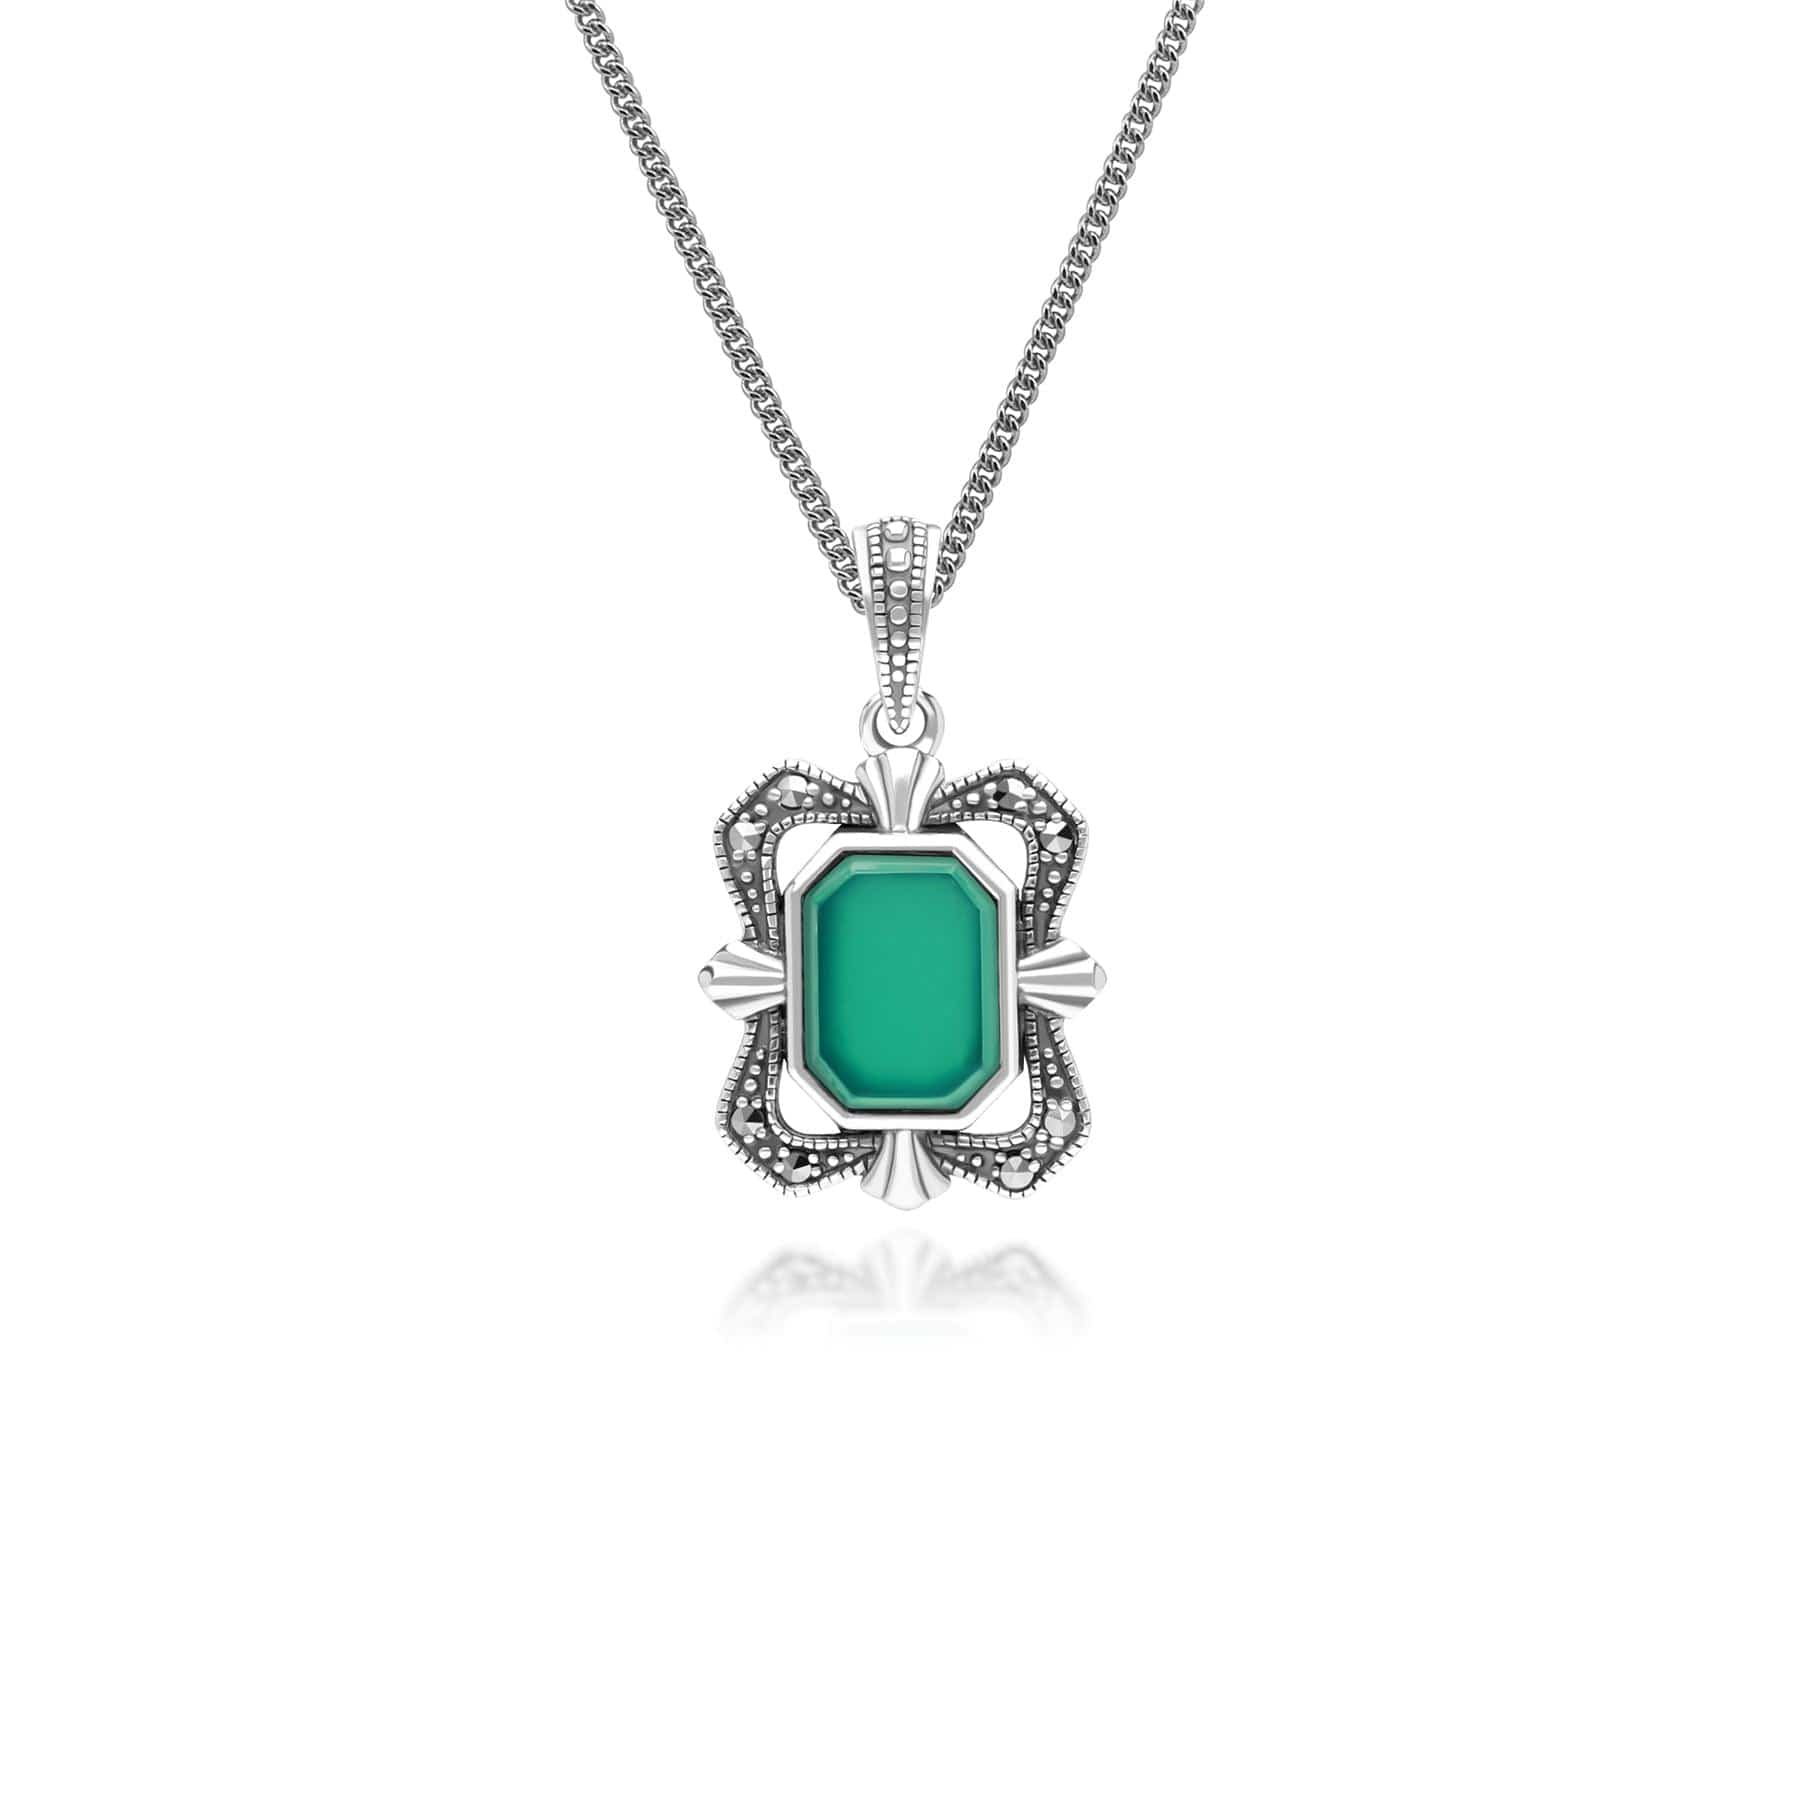 Art Deco Style Baguette Chalcedony and Marcasite Pendant Necklace in Sterling Silver 214P334501925 